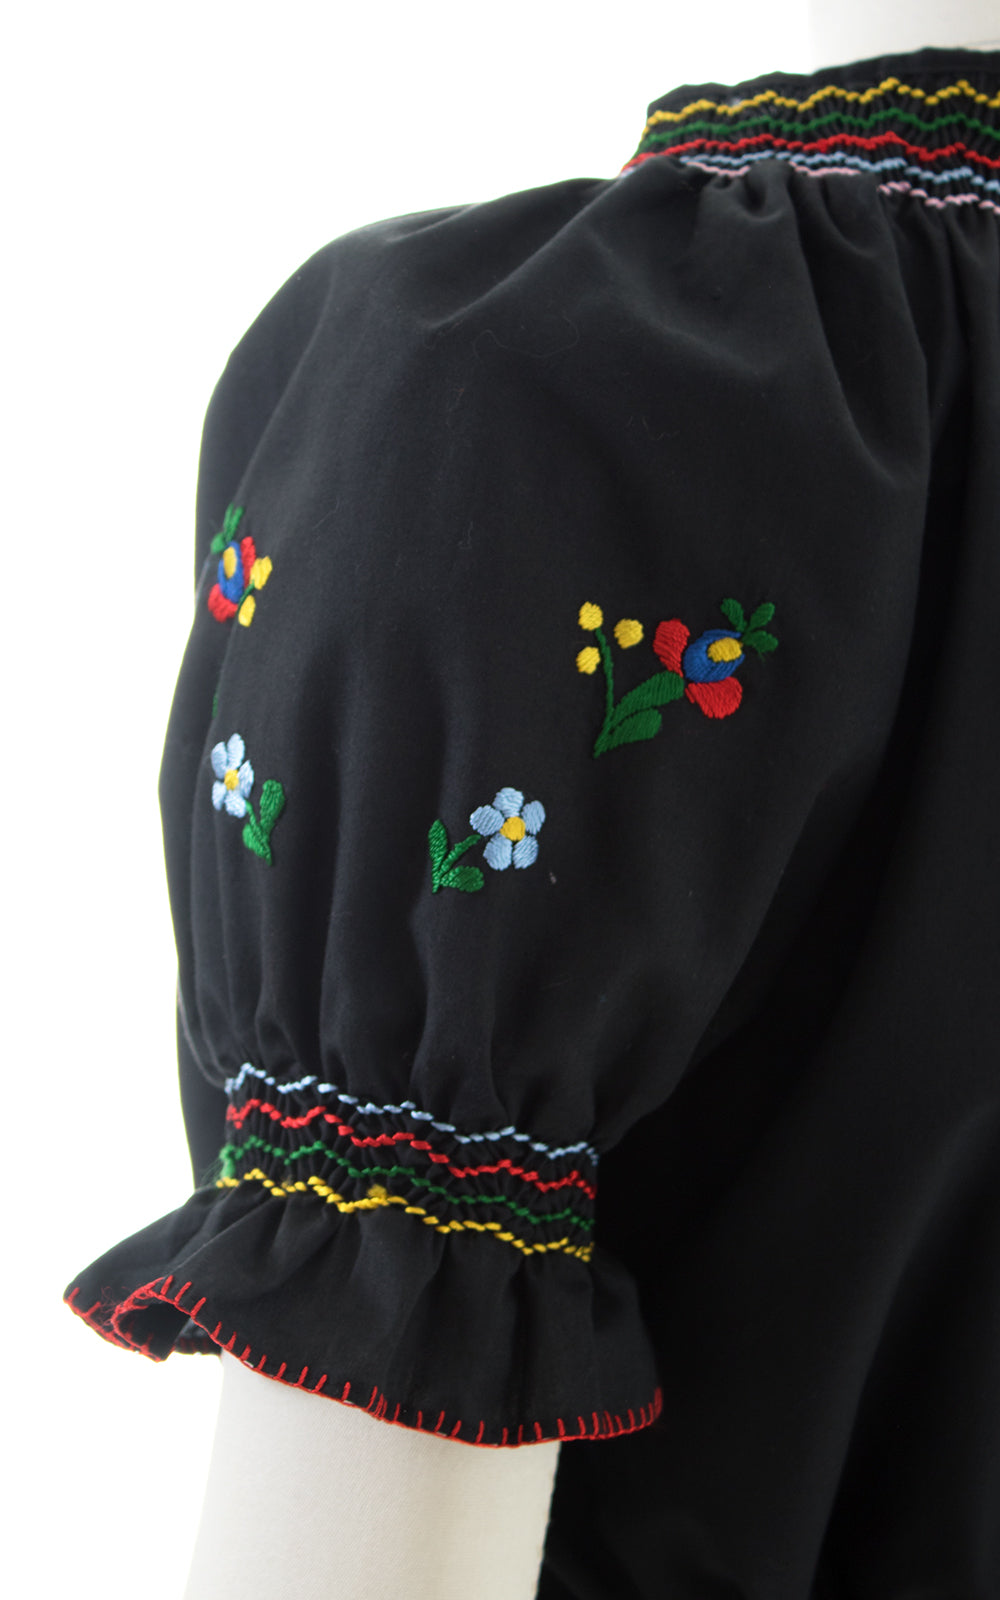 1930s Style Floral Embroidered Peasant Top